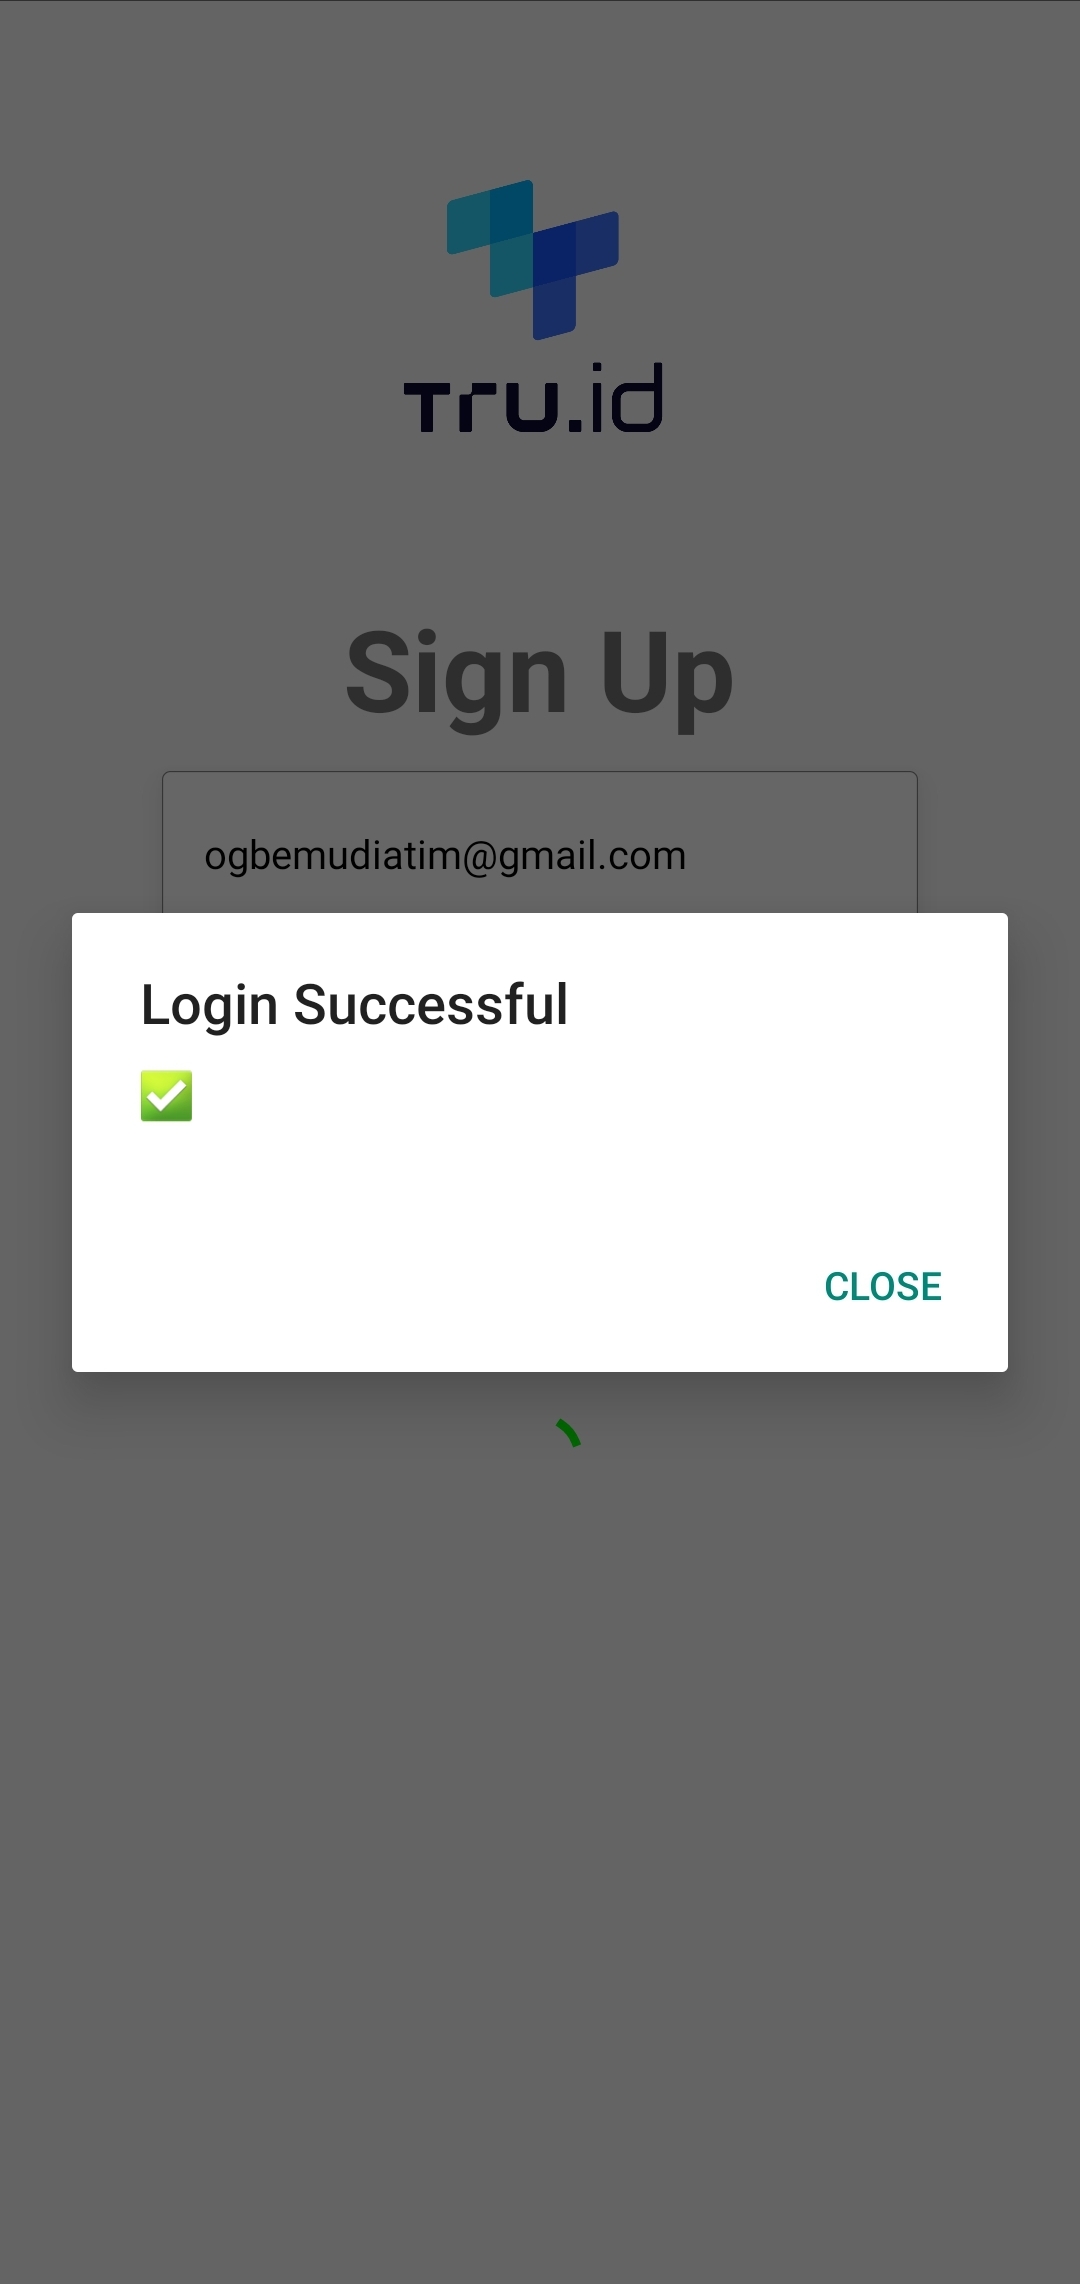 the tru.ID logo with a text that says 'Sign Up' with an email text input and a password text input, a button that says 'sign up' and a modal overlaid with the text 'login successful' and a checkmark emoji.